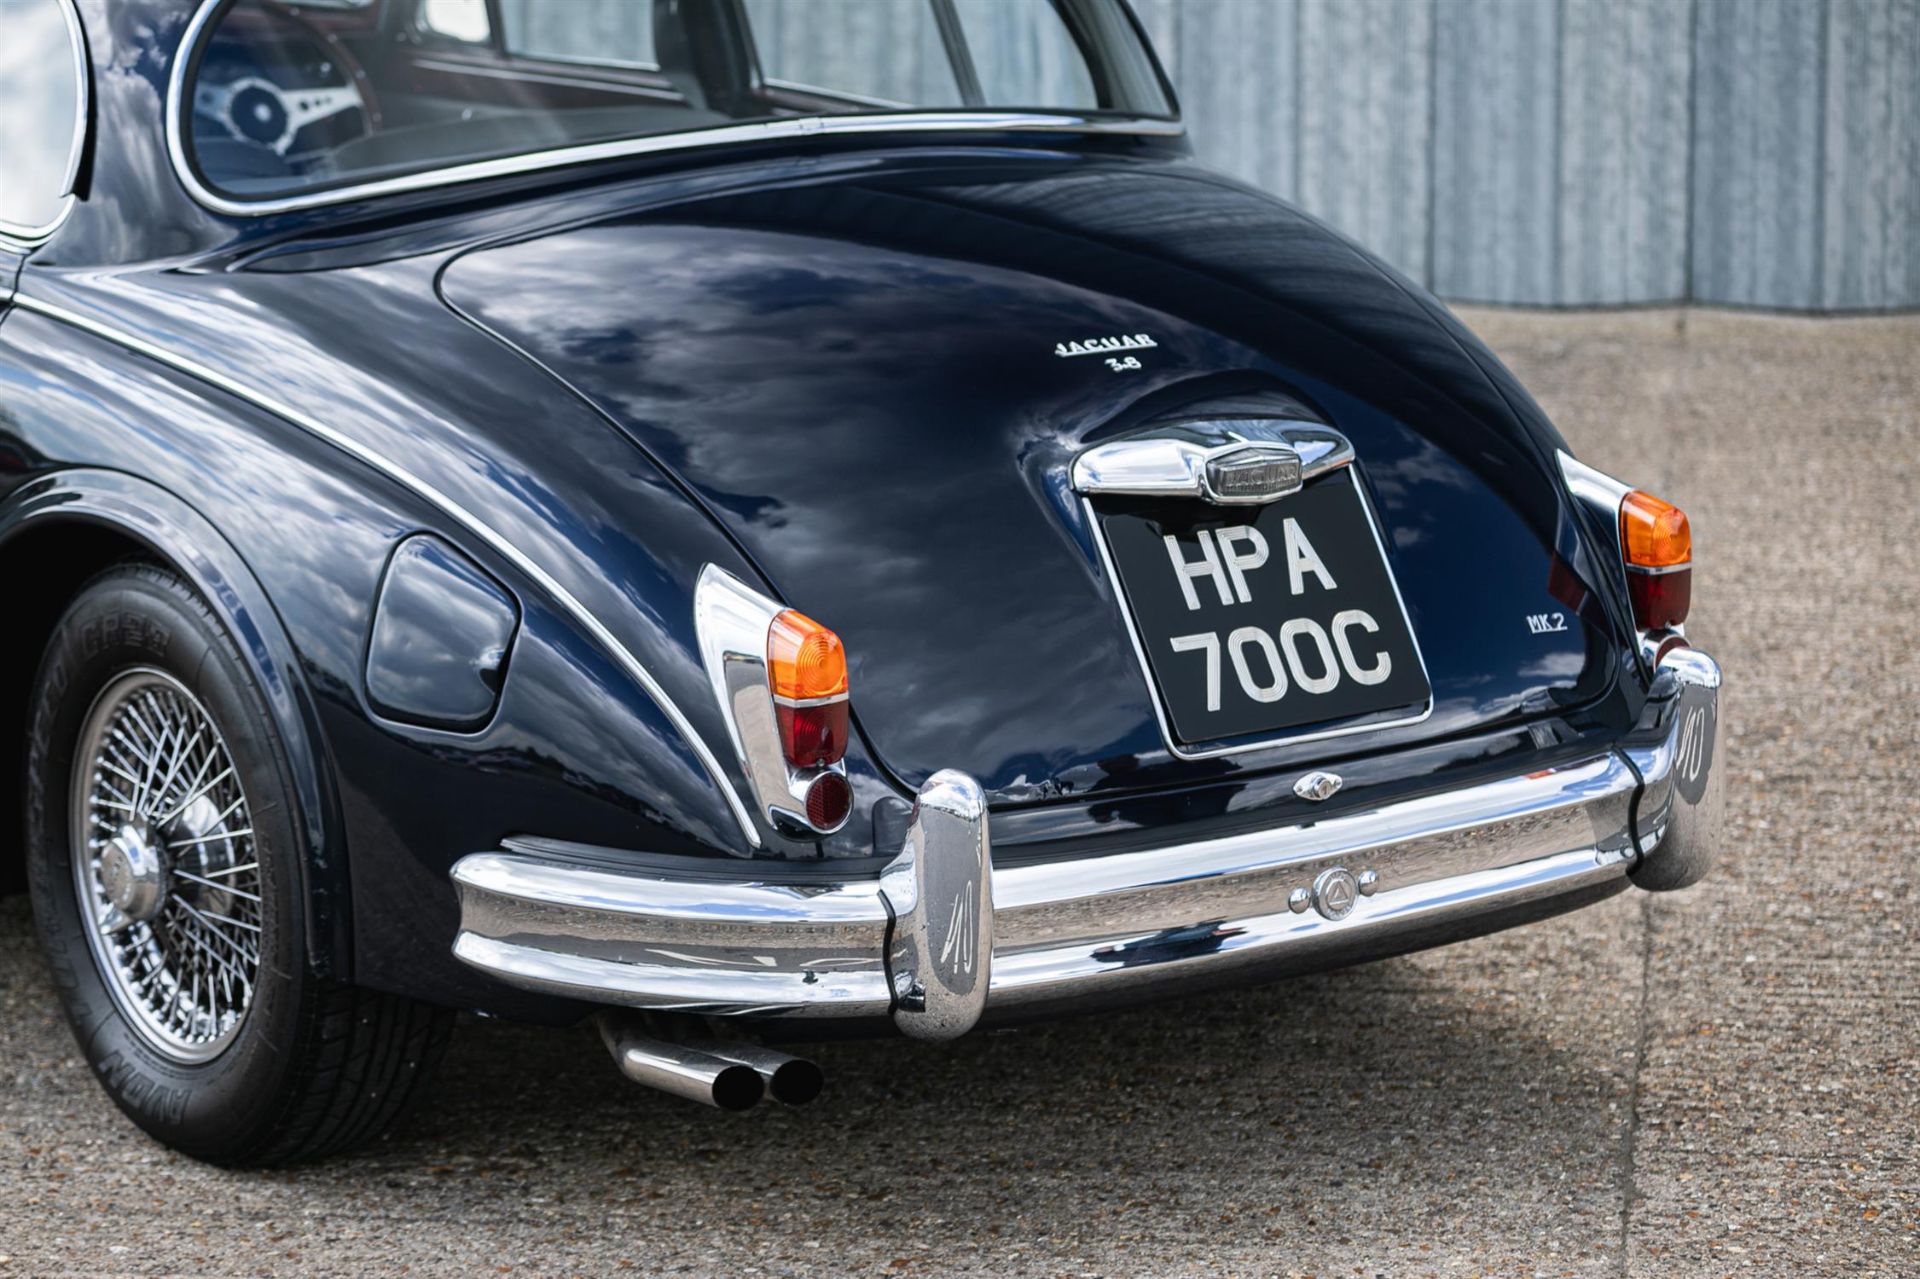 1964 Jaguar Mk2 3.8-Litre 'Coombs'-Style Sports Saloon - Image 9 of 10